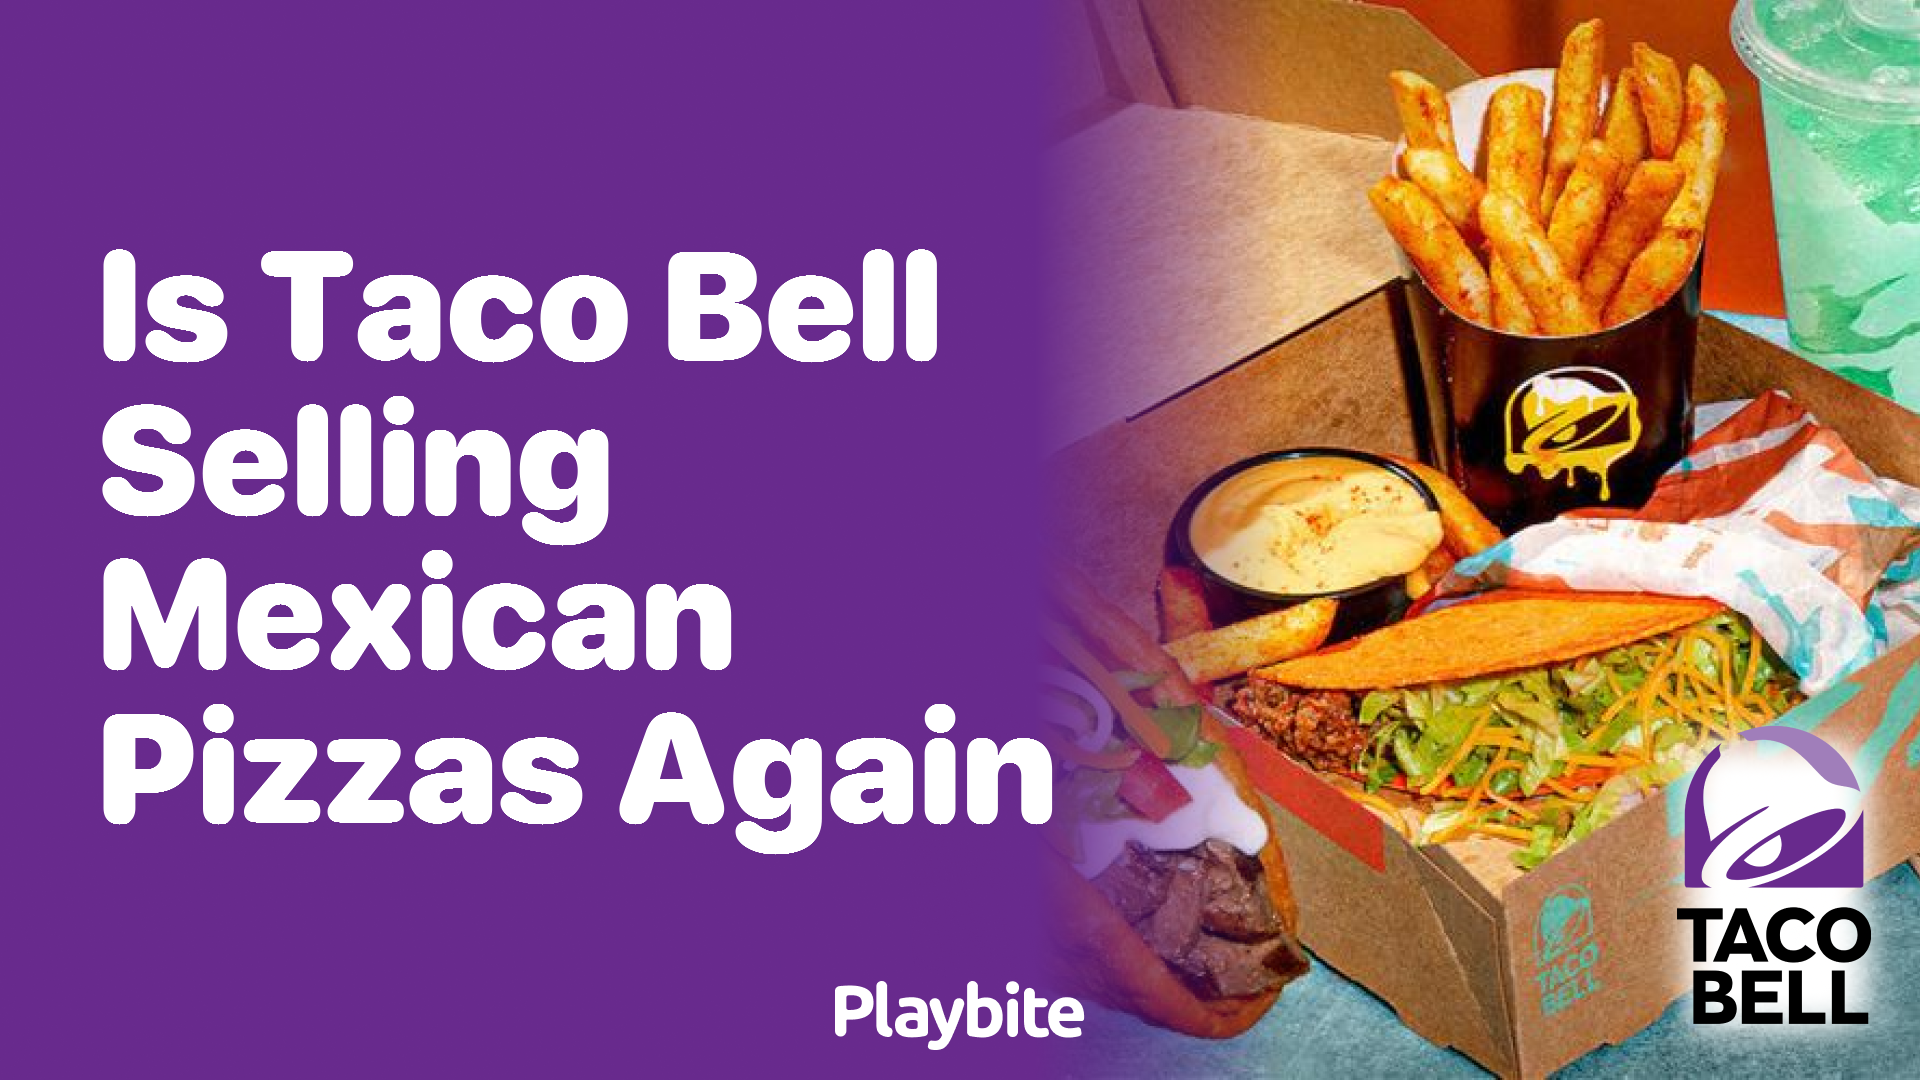 Is Taco Bell Selling Mexican Pizzas Again? Find Out Here!